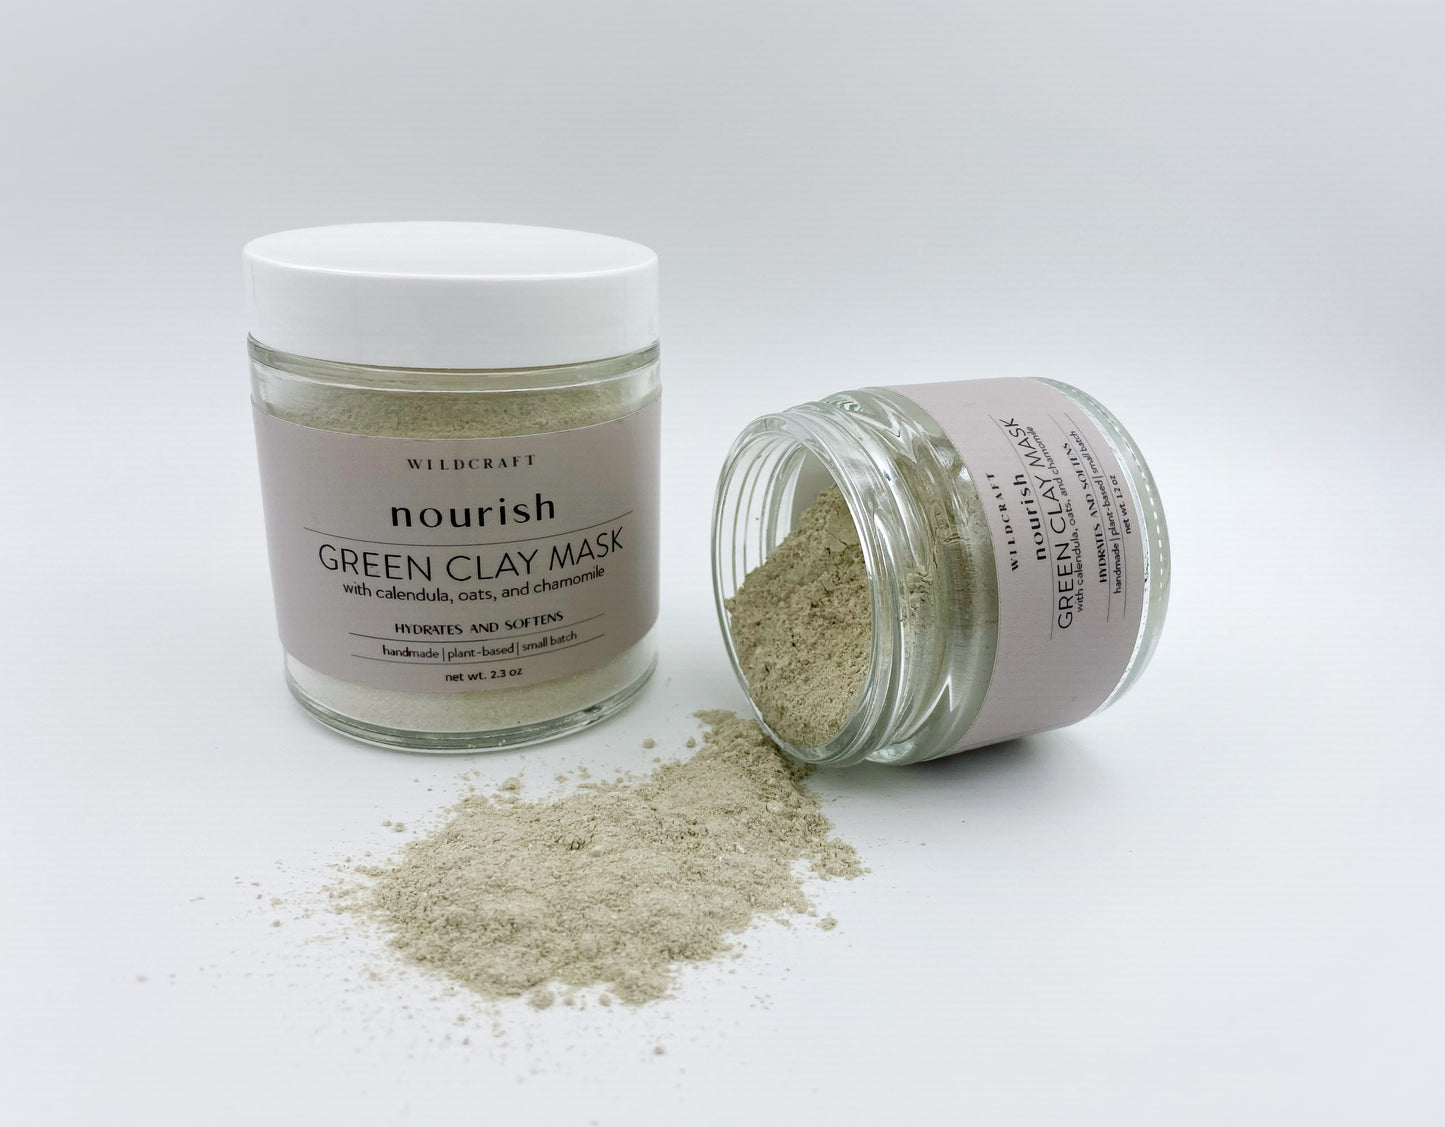 A calming french green & kaolin clay face mask powder formulated with botanicals to soothe & comfort the skin while providing a boost of antioxidants. This mask works to draw impurities out while providing anti-inflammatory, anti-bacterial, & skin softening actions. Great for all skin types, especially sensitive skin!